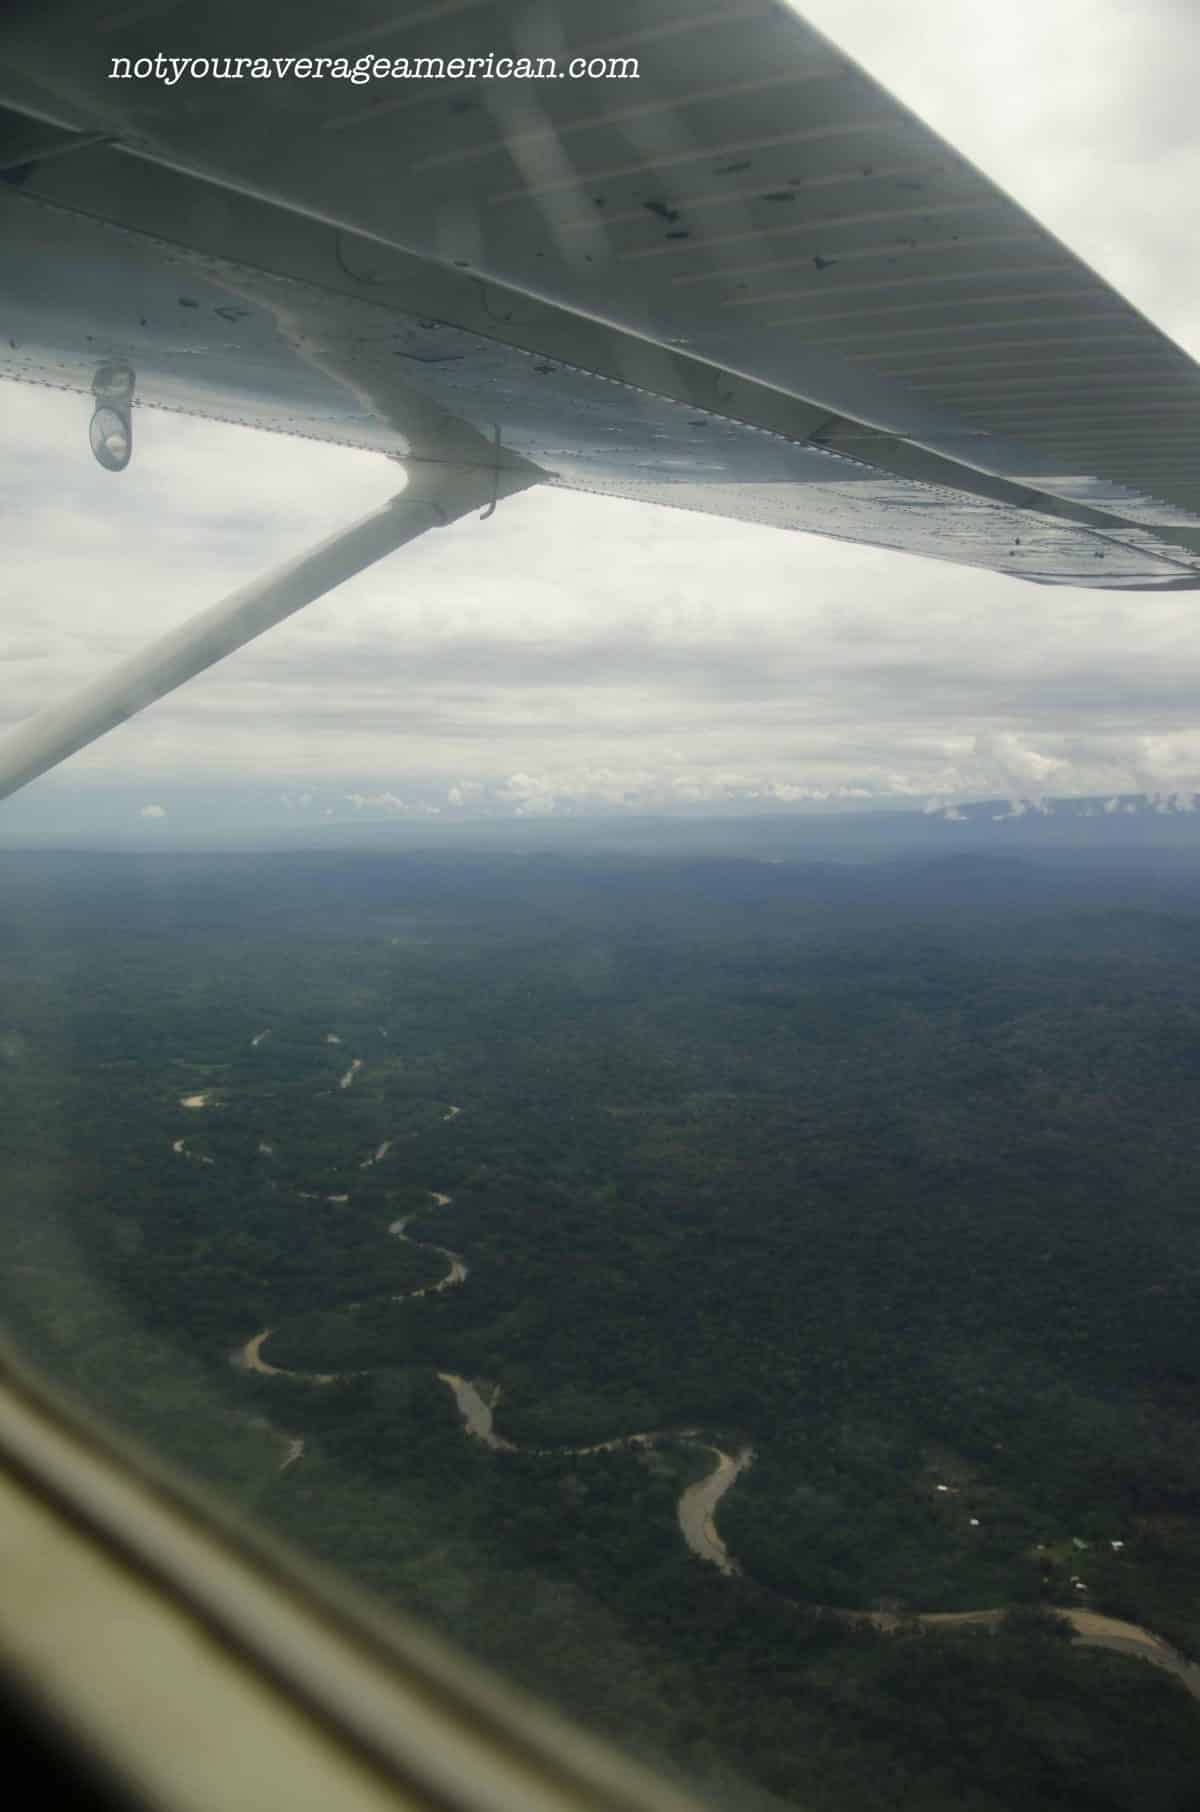 The river winds back and forth through the lands of the Huaorani, Huaroani Lodge